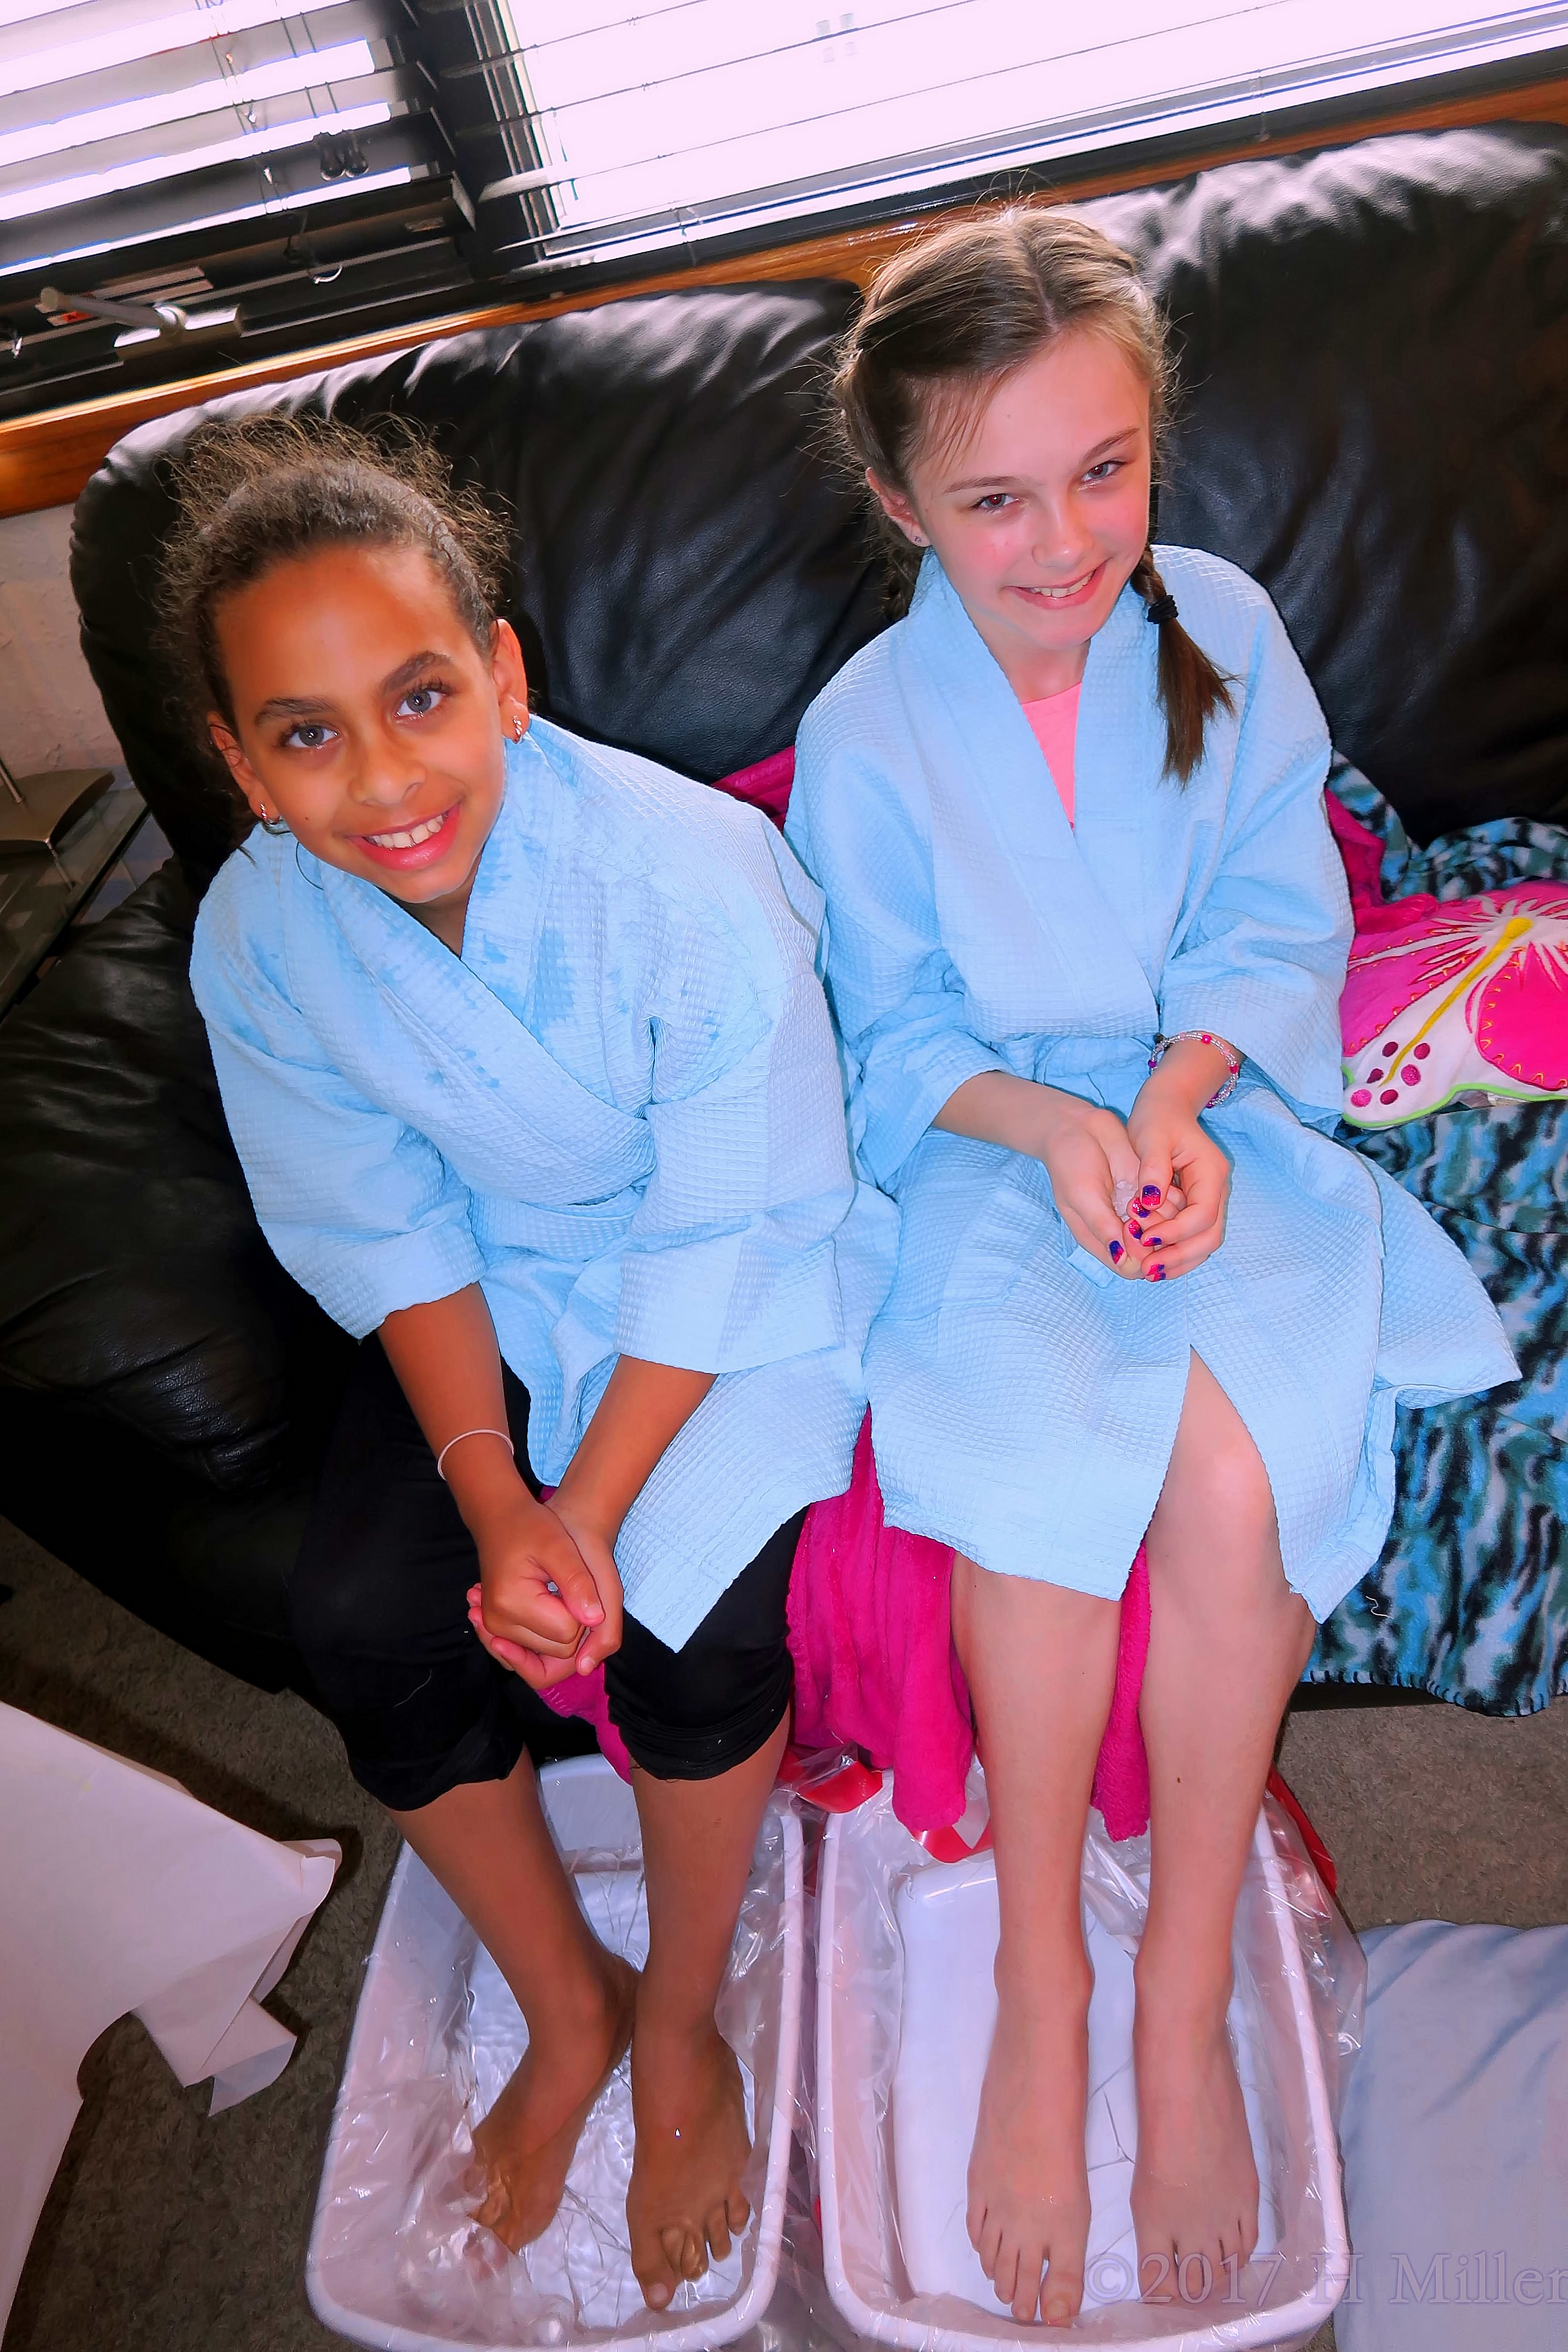 After Girls Manis, It's Time For Kids Pedicures! 